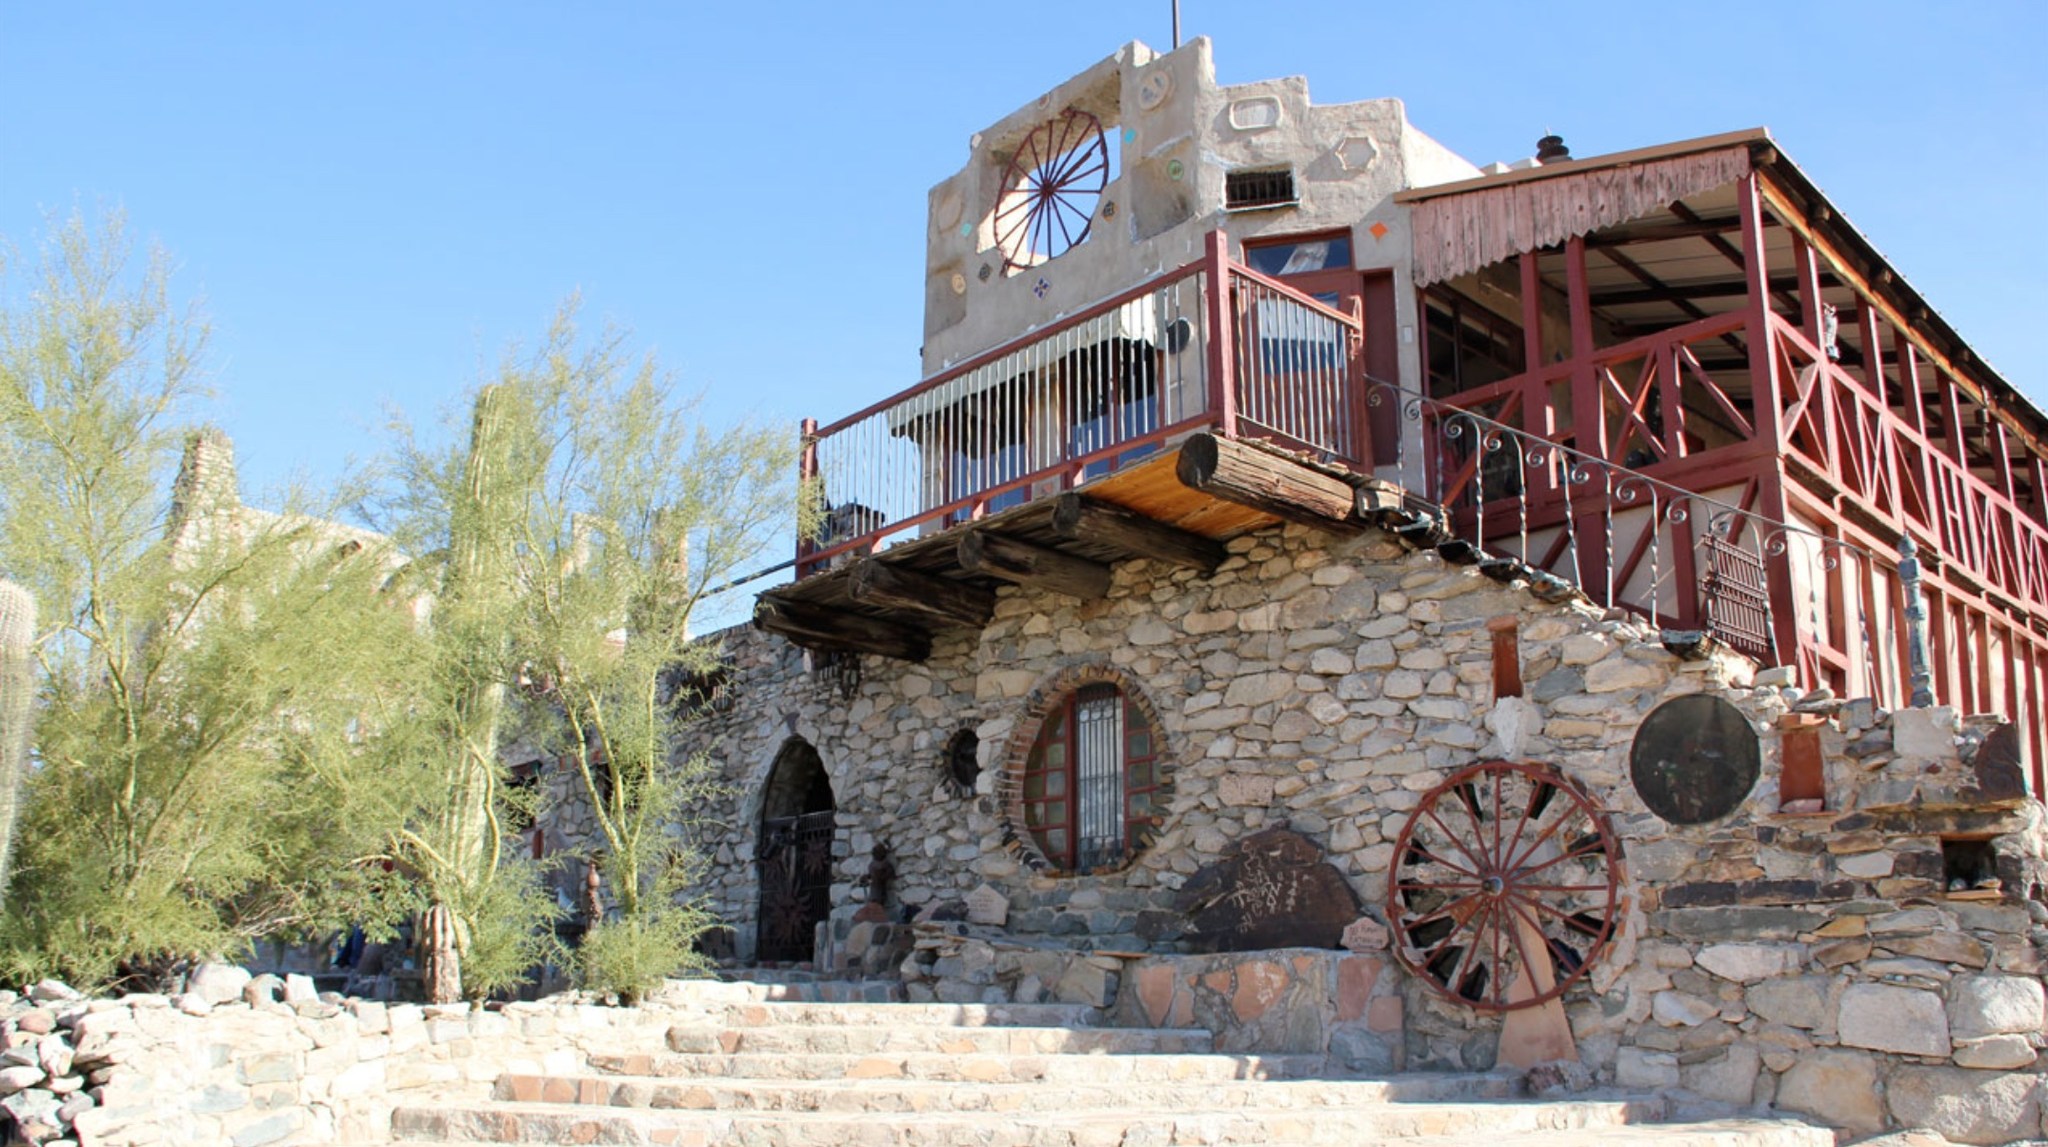 Photo shows the exterior of a stone building in South Phoenix known as the Mystery Castle.